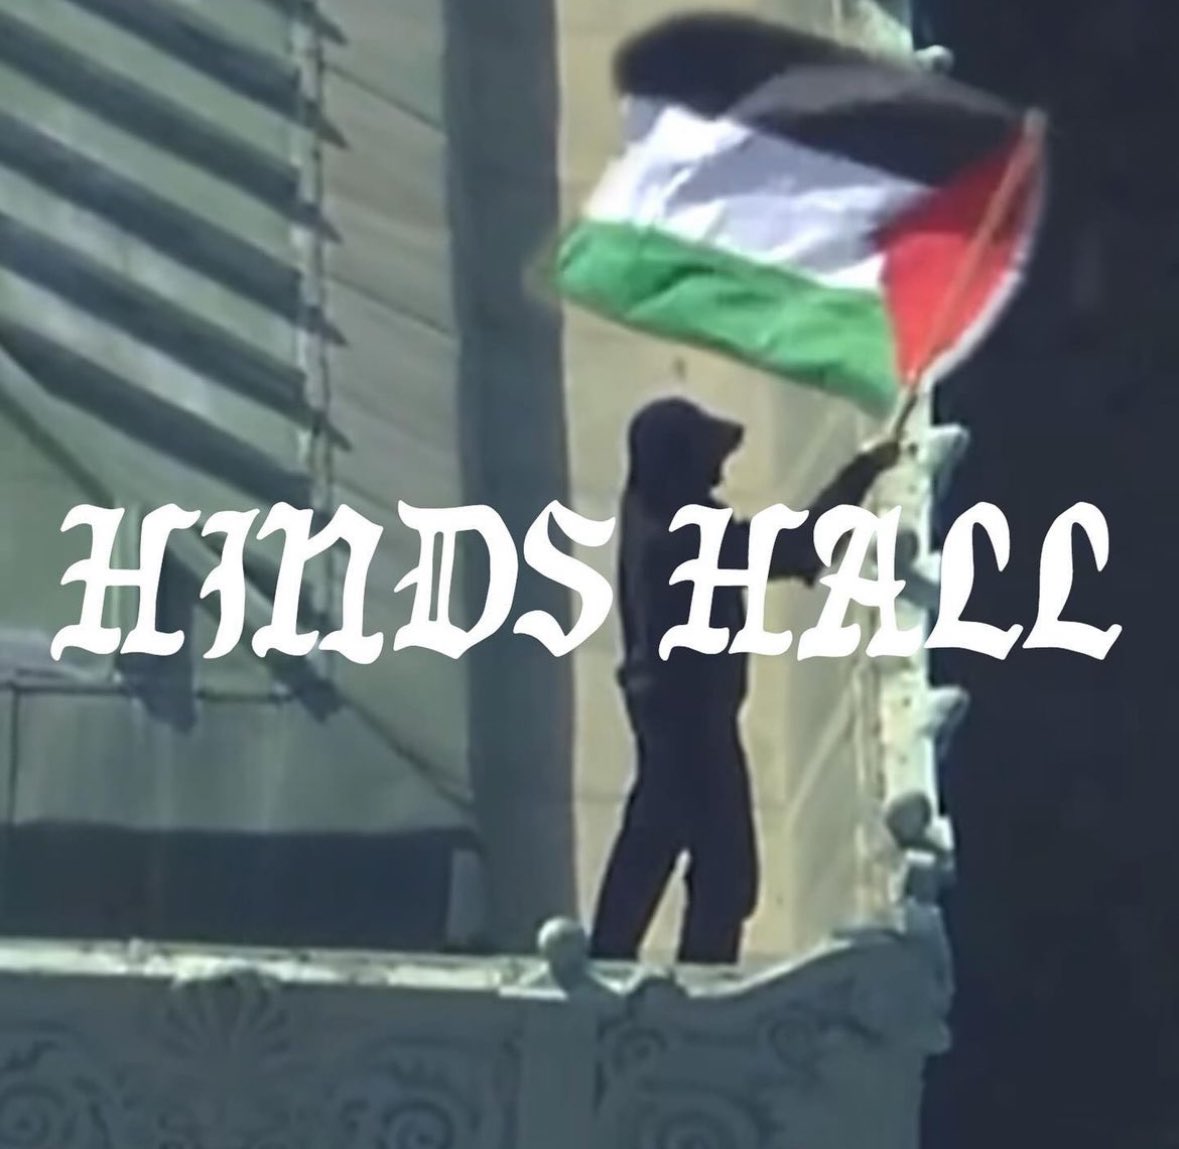 Don’t forget to stream Hind’s Hall by Macklemore! All proceeds will be donated to UNRWA for humanitarian aid in Gaza.